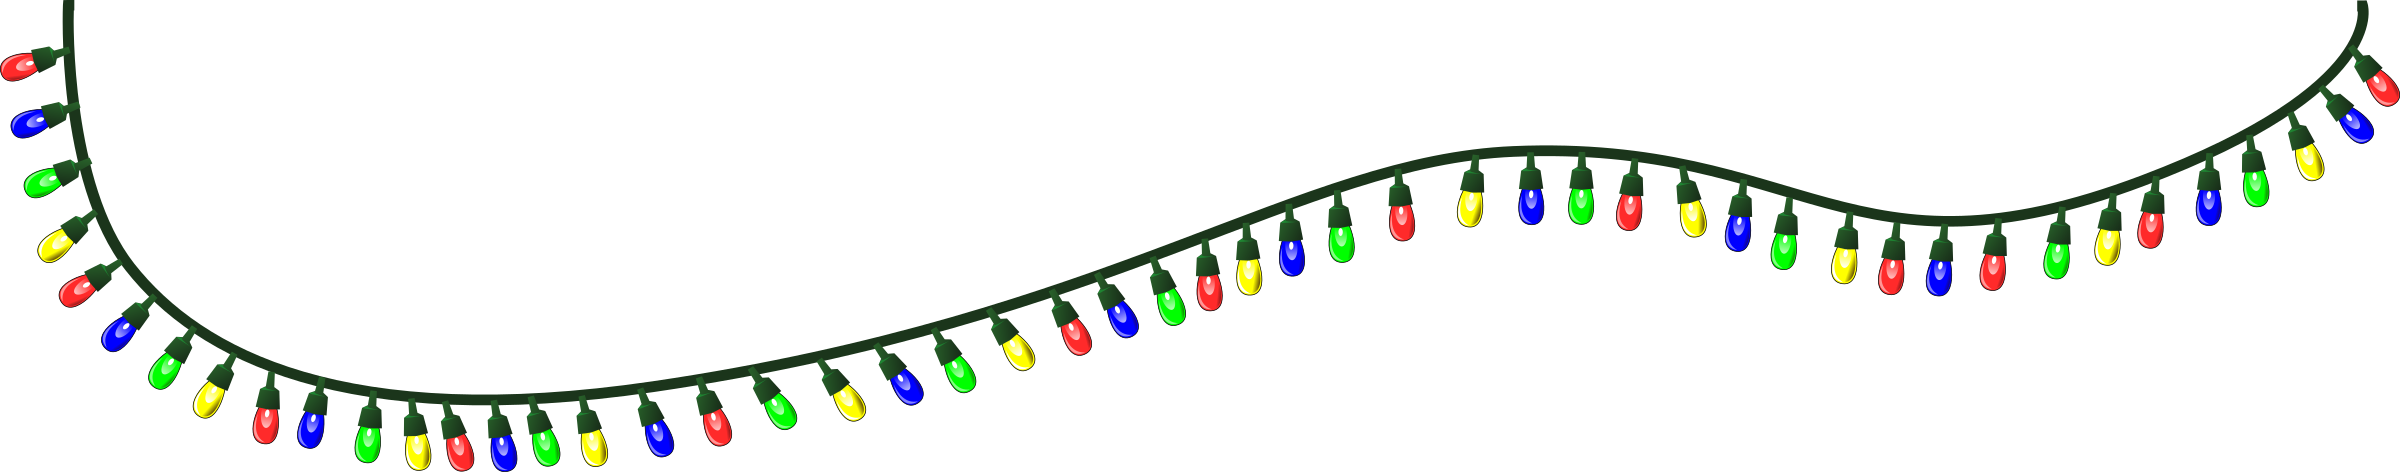 Free Christmas Lights Transparent Background, Download Free Christmas Lights Transparent Backgrounds png image, Free ClipArts on Clipart Library